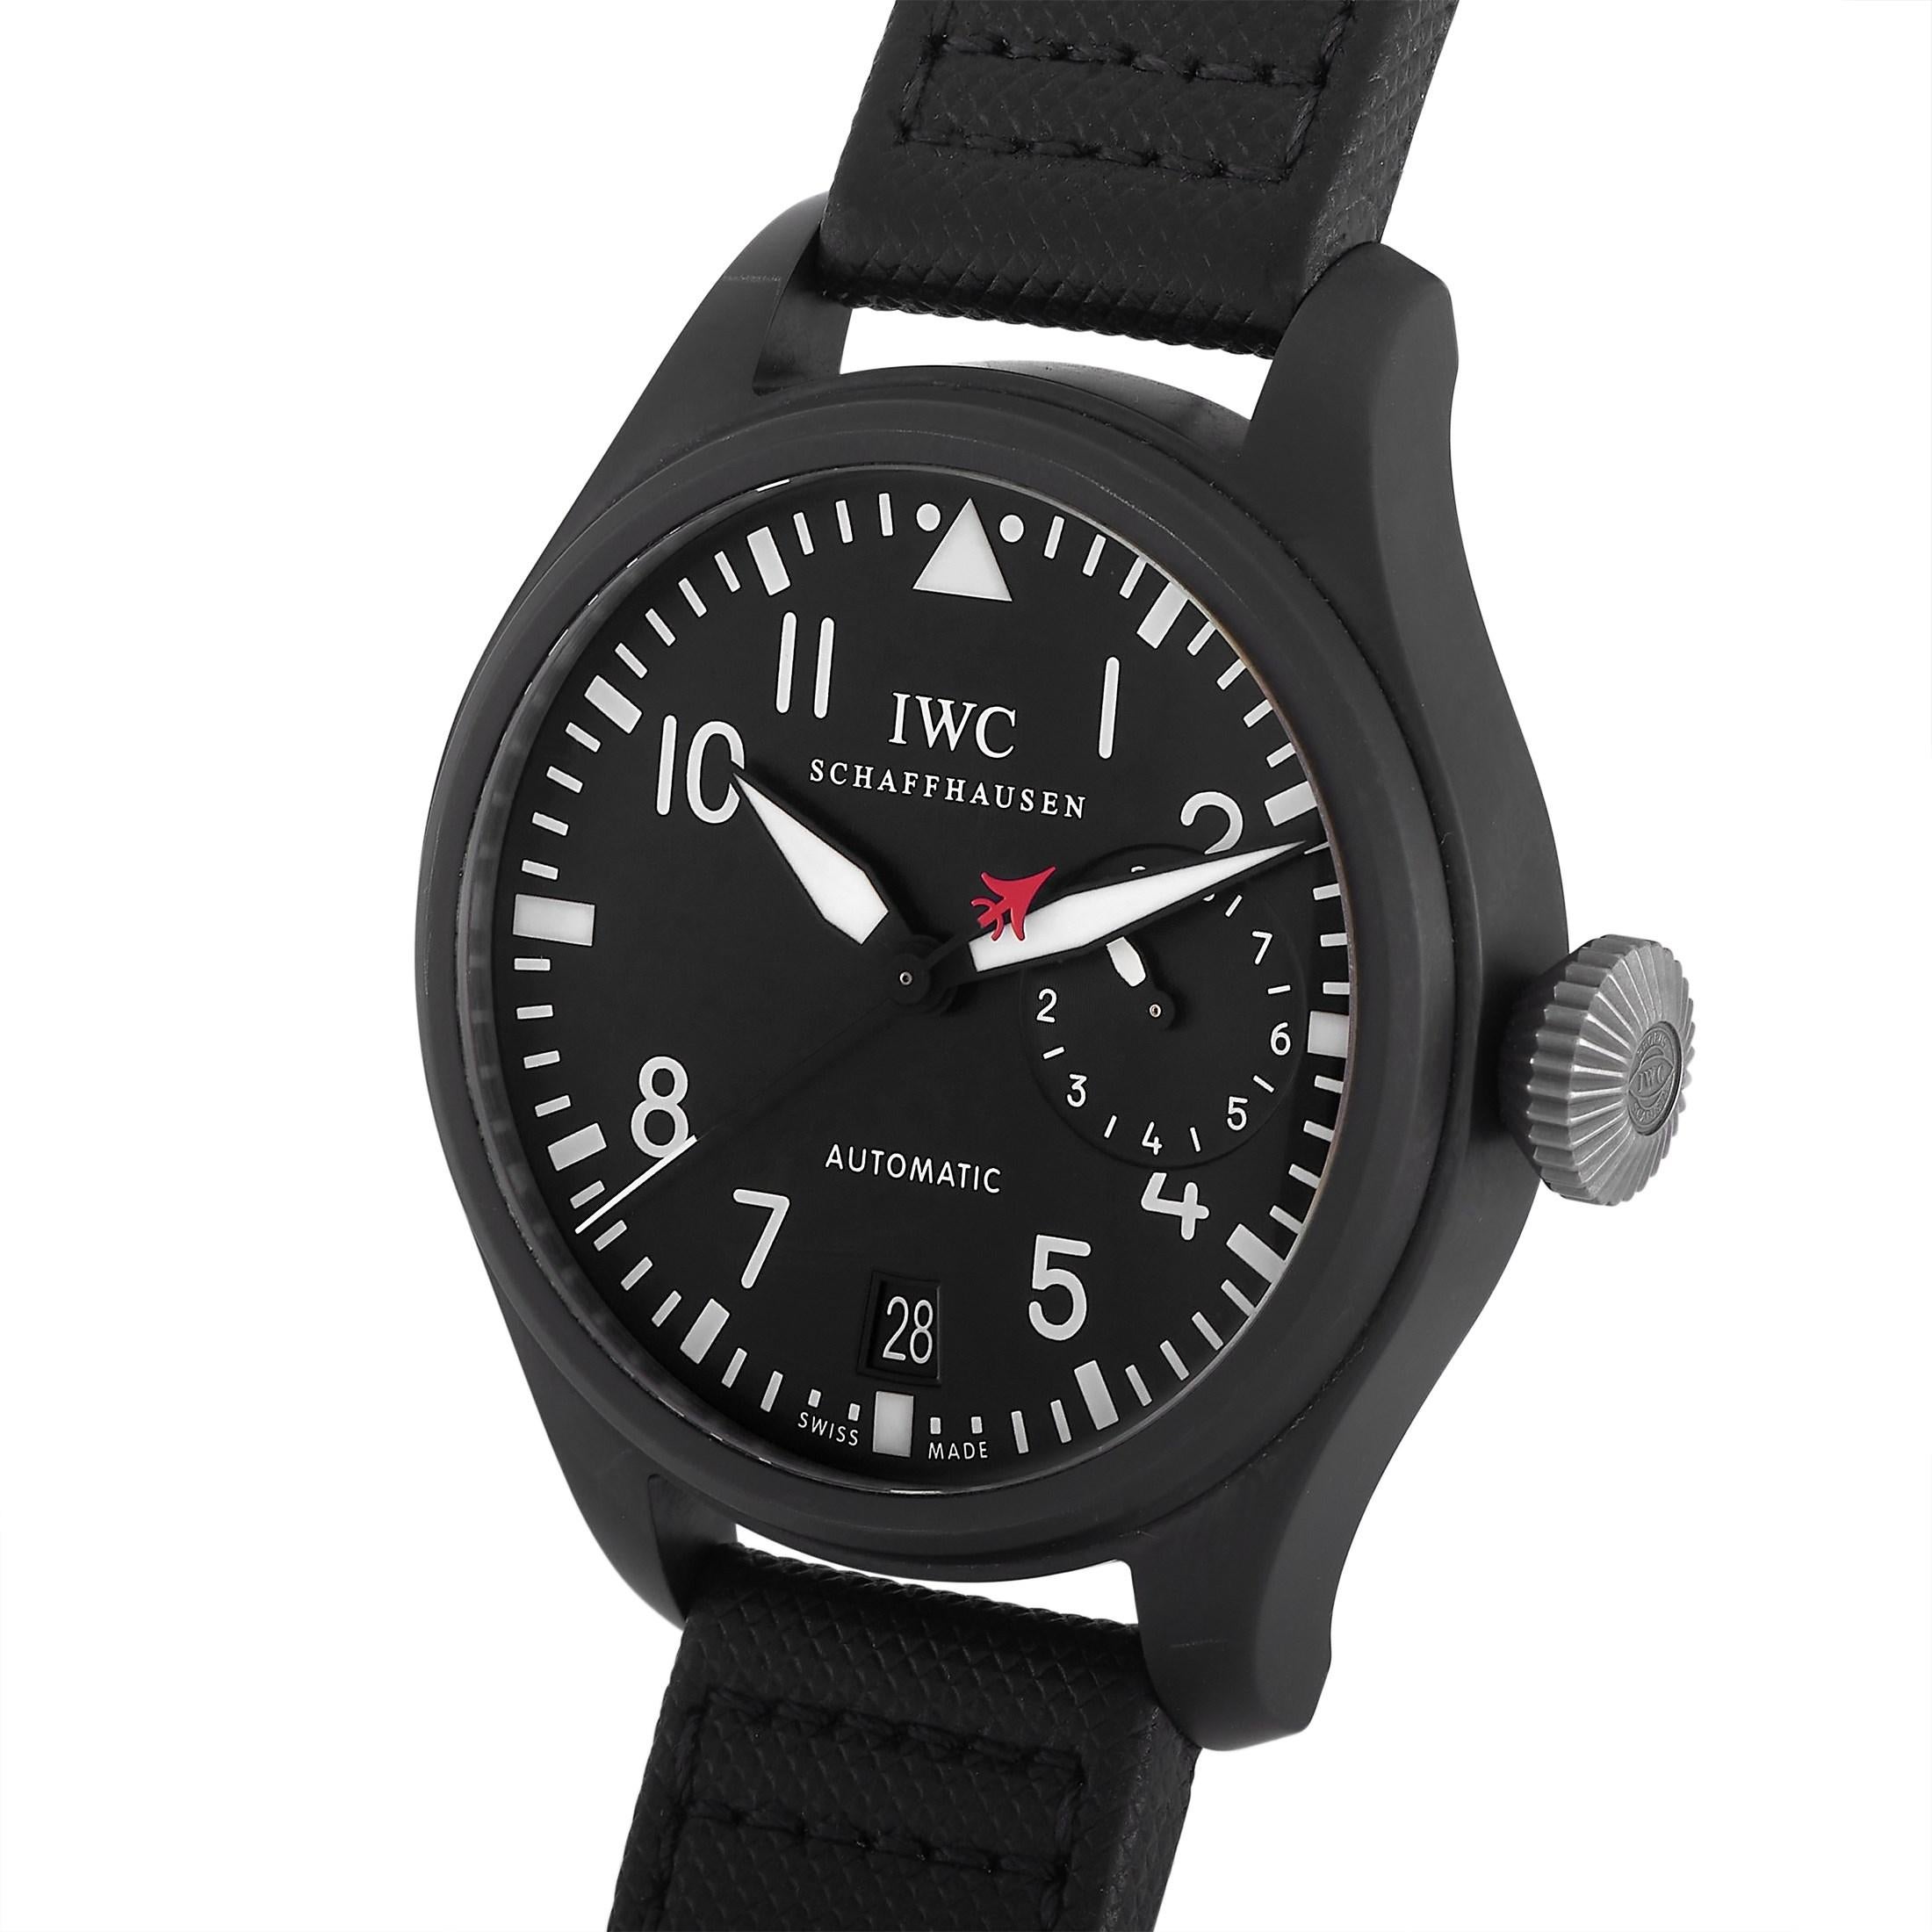 The IWC Big Pilot Top Gun Watch, reference number IW501901, is a stunning timepiece with a striking sense of minimalism.

This all-black design comes complete with a 49mm round ceramic case attached to a black calfskin leather strap. On the black